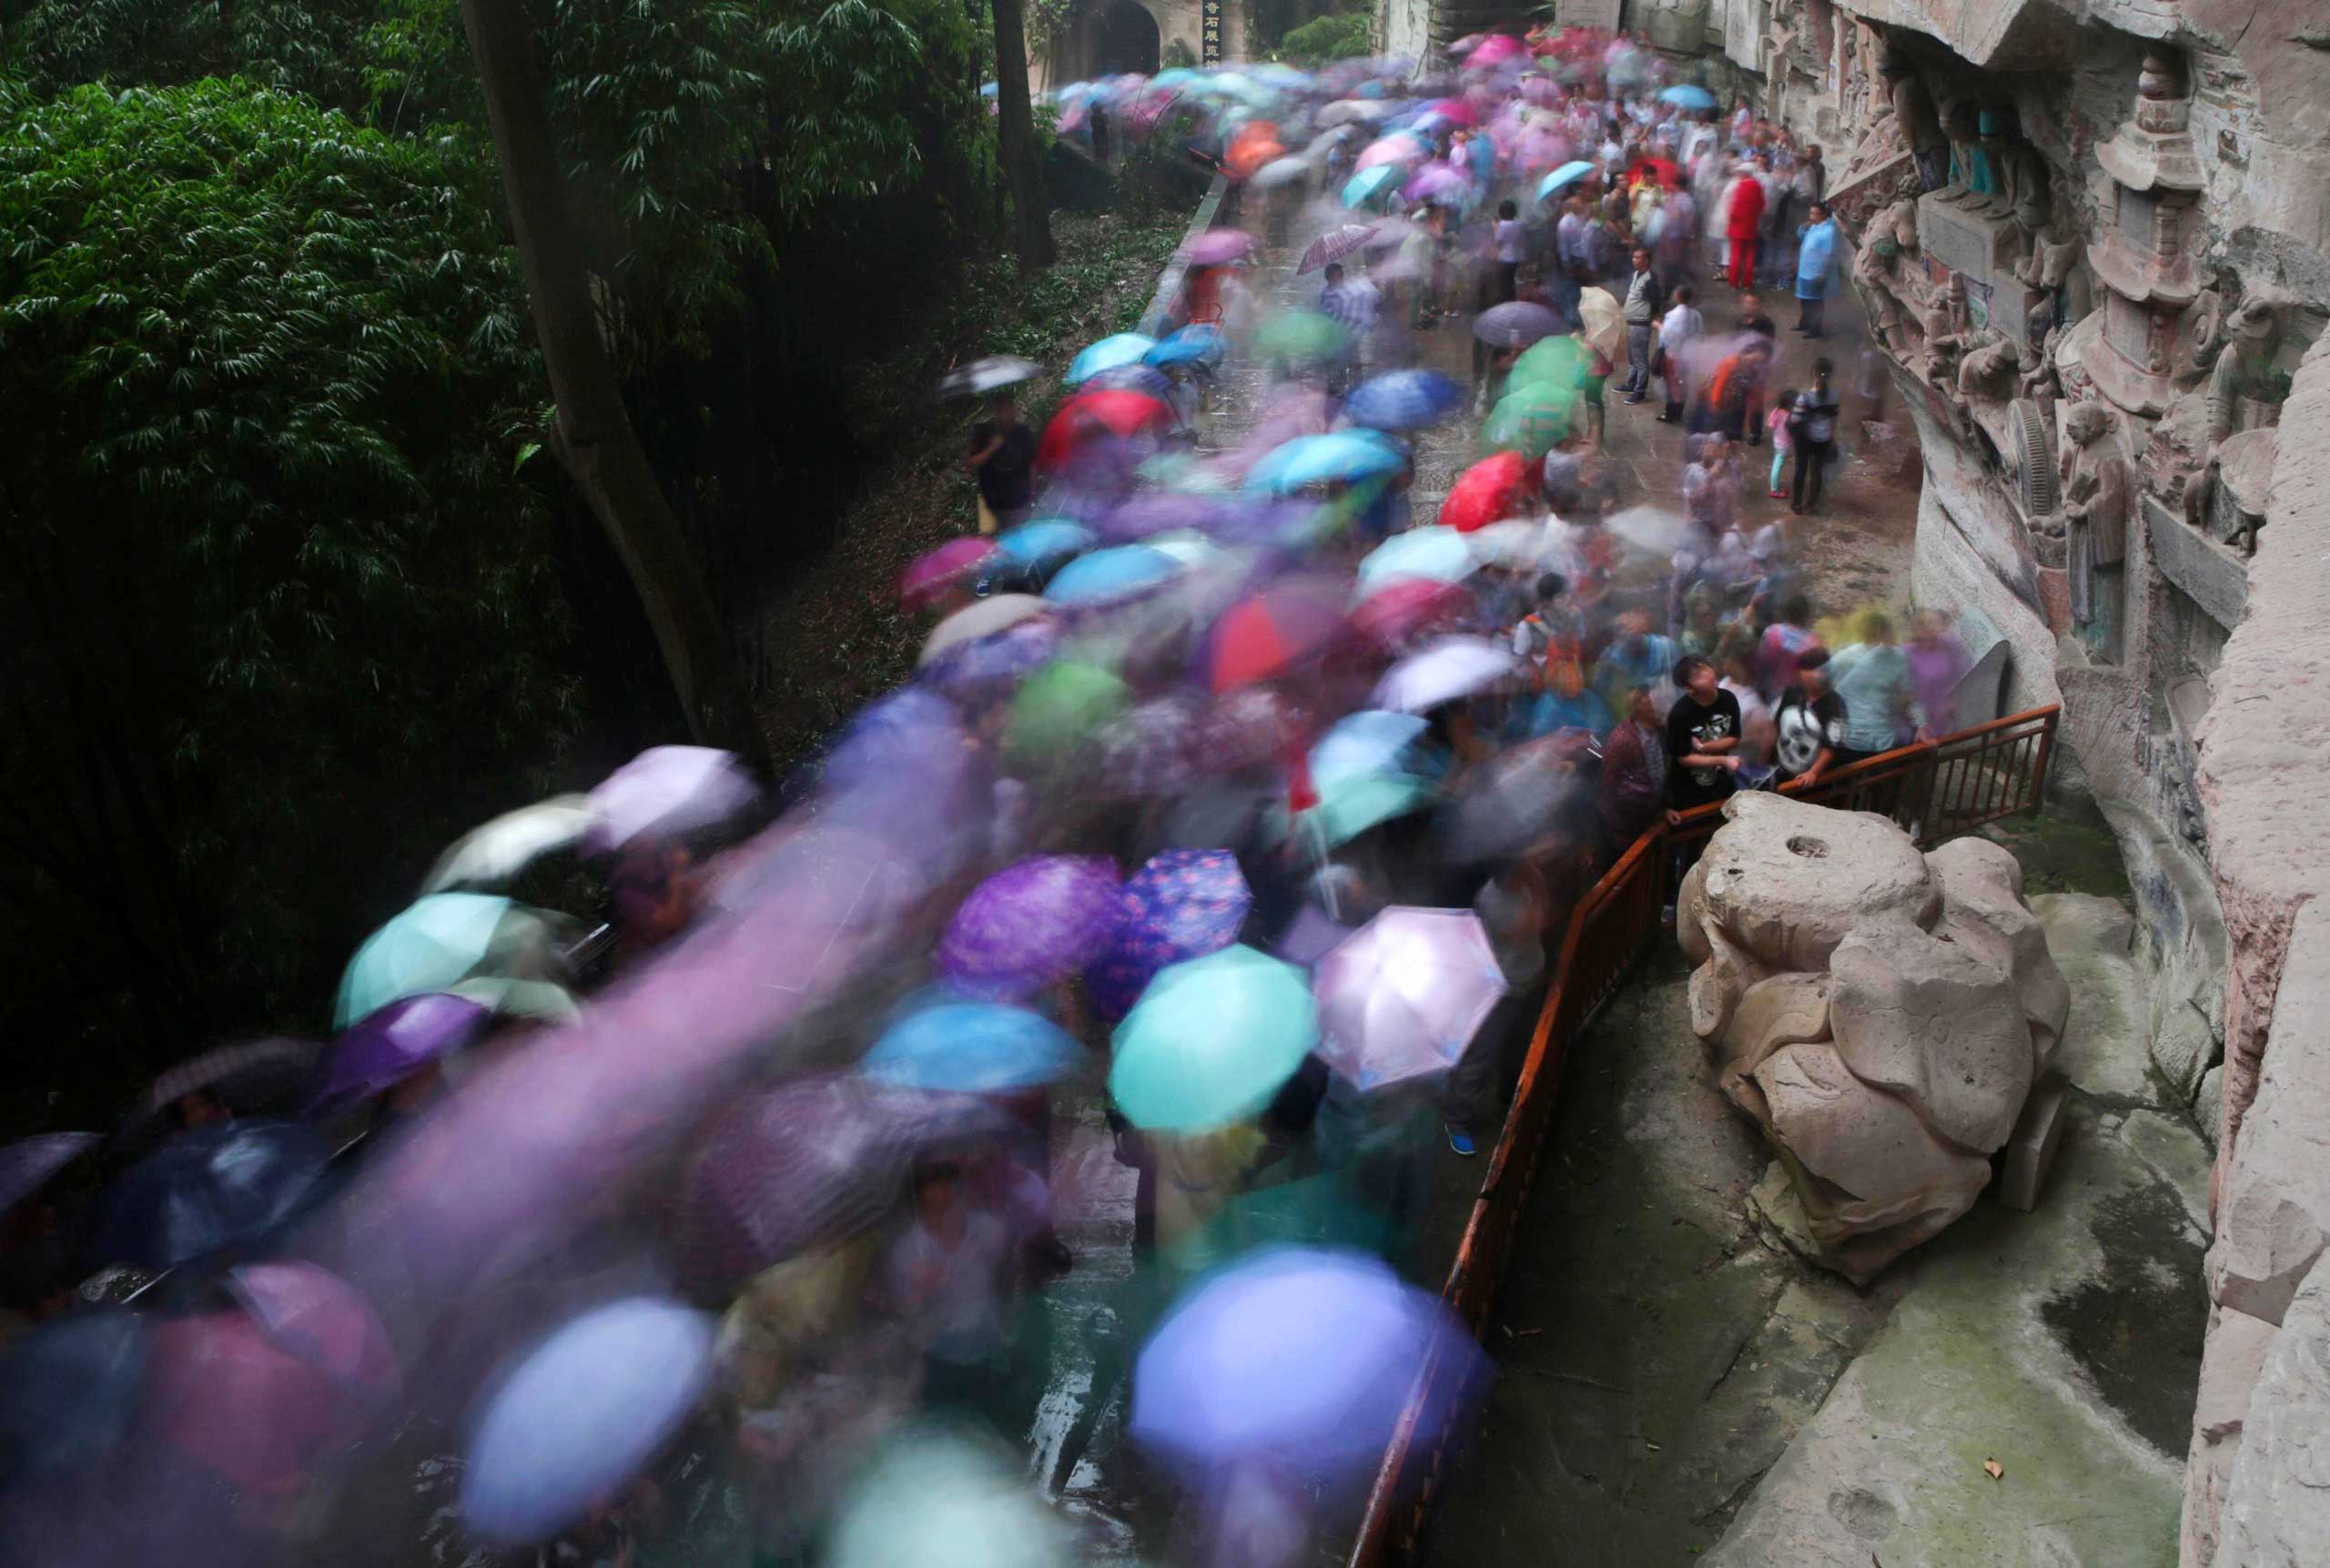 Tourists holding umbrellas crowd visit the stone sculptures at the Baoding Mountain on the third day of the seven-day national day holiday, in Chongqing municipality, Oct. 3, 2014.